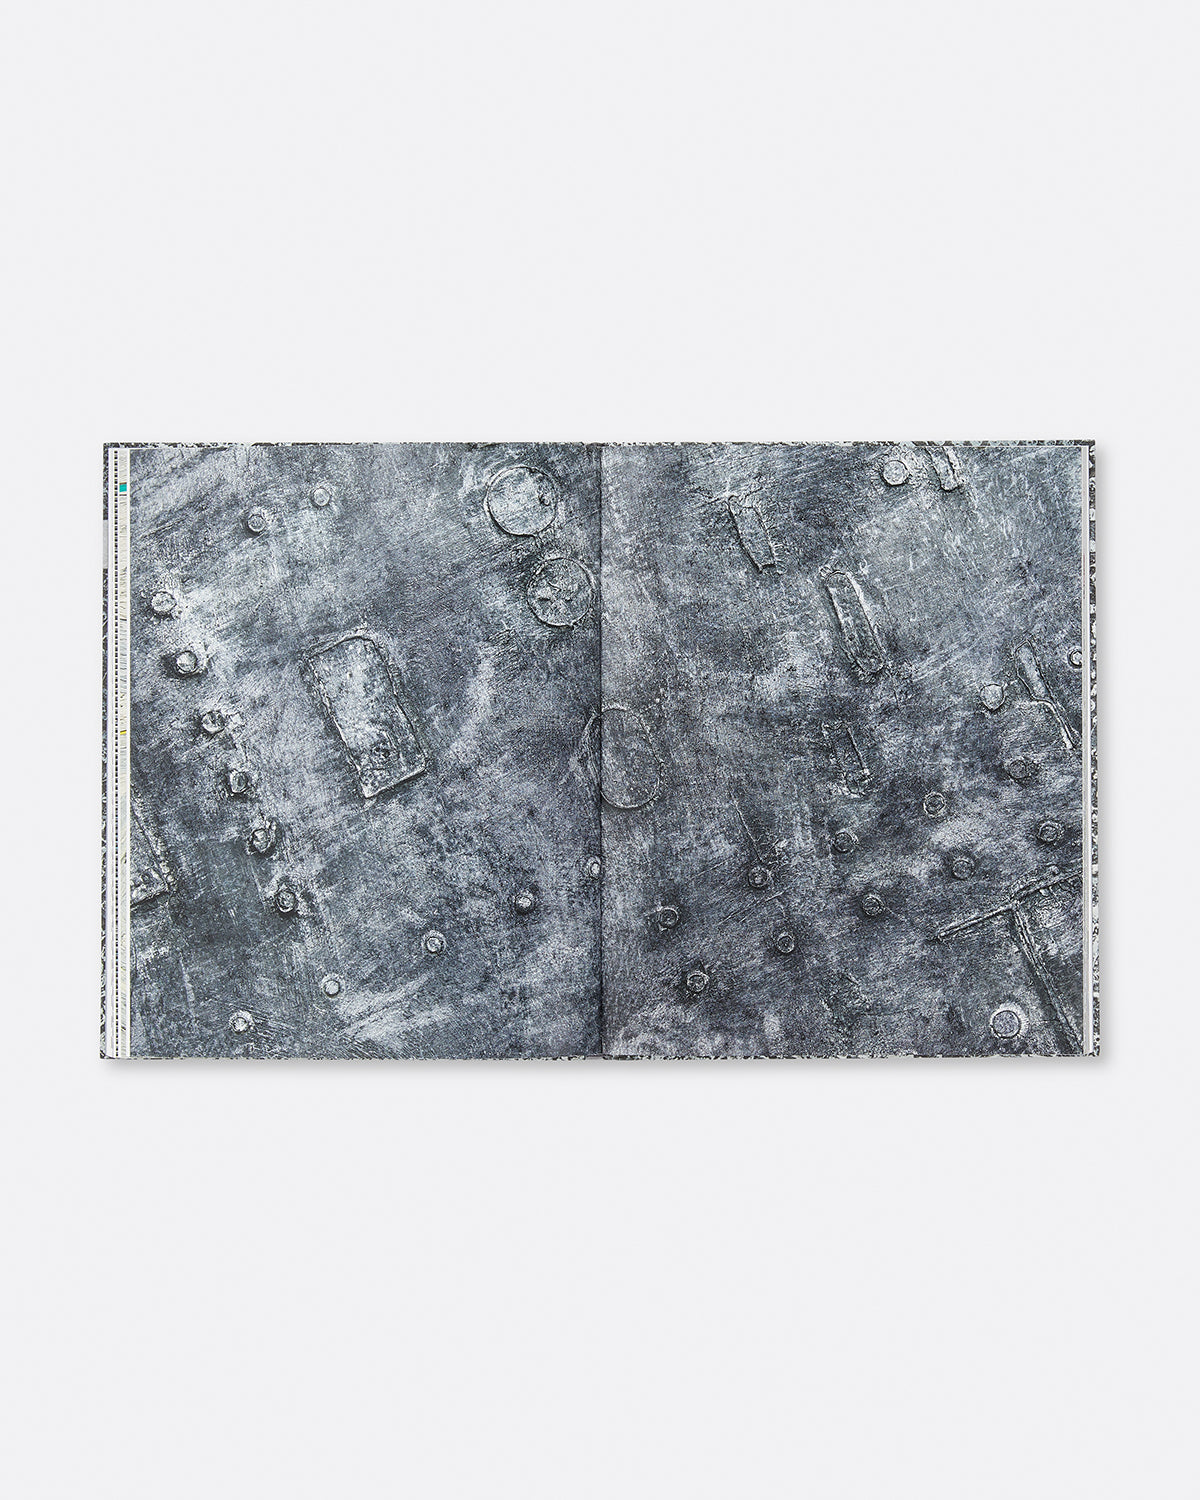 More Dimensions Than You Know: Jack Whitten, Paintings 1979-1989 Default Title